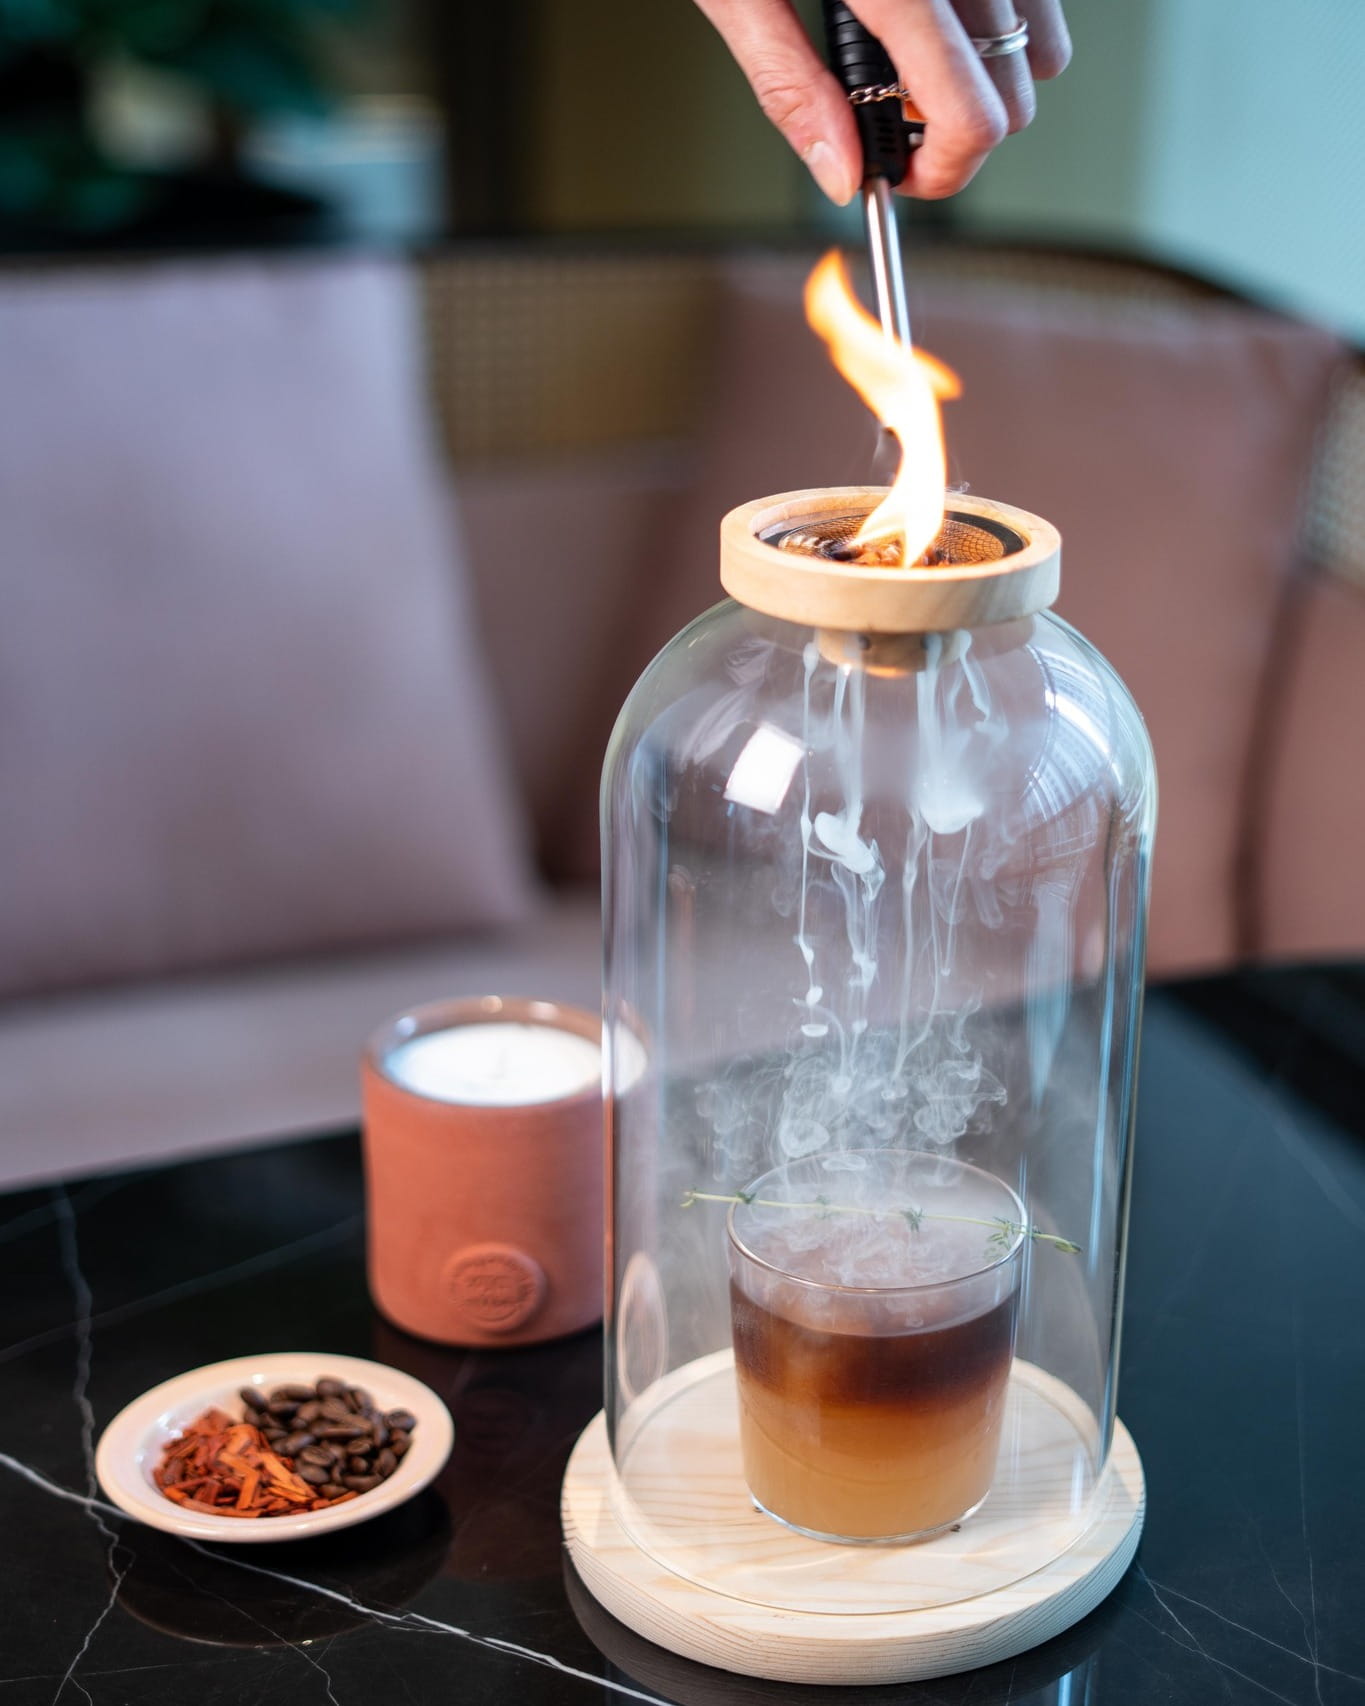 ☕ Presented with burning sandalwood and delicate edible gold leaves, No.84 Cold Brew is a classy beverage that brings the Zen atmosphere from @becandle_saikung ‘s storefront to Domain.

#atEAST #EASTHongKong #EATatEAST #findyourDOMAIN #DomainxBeCandle